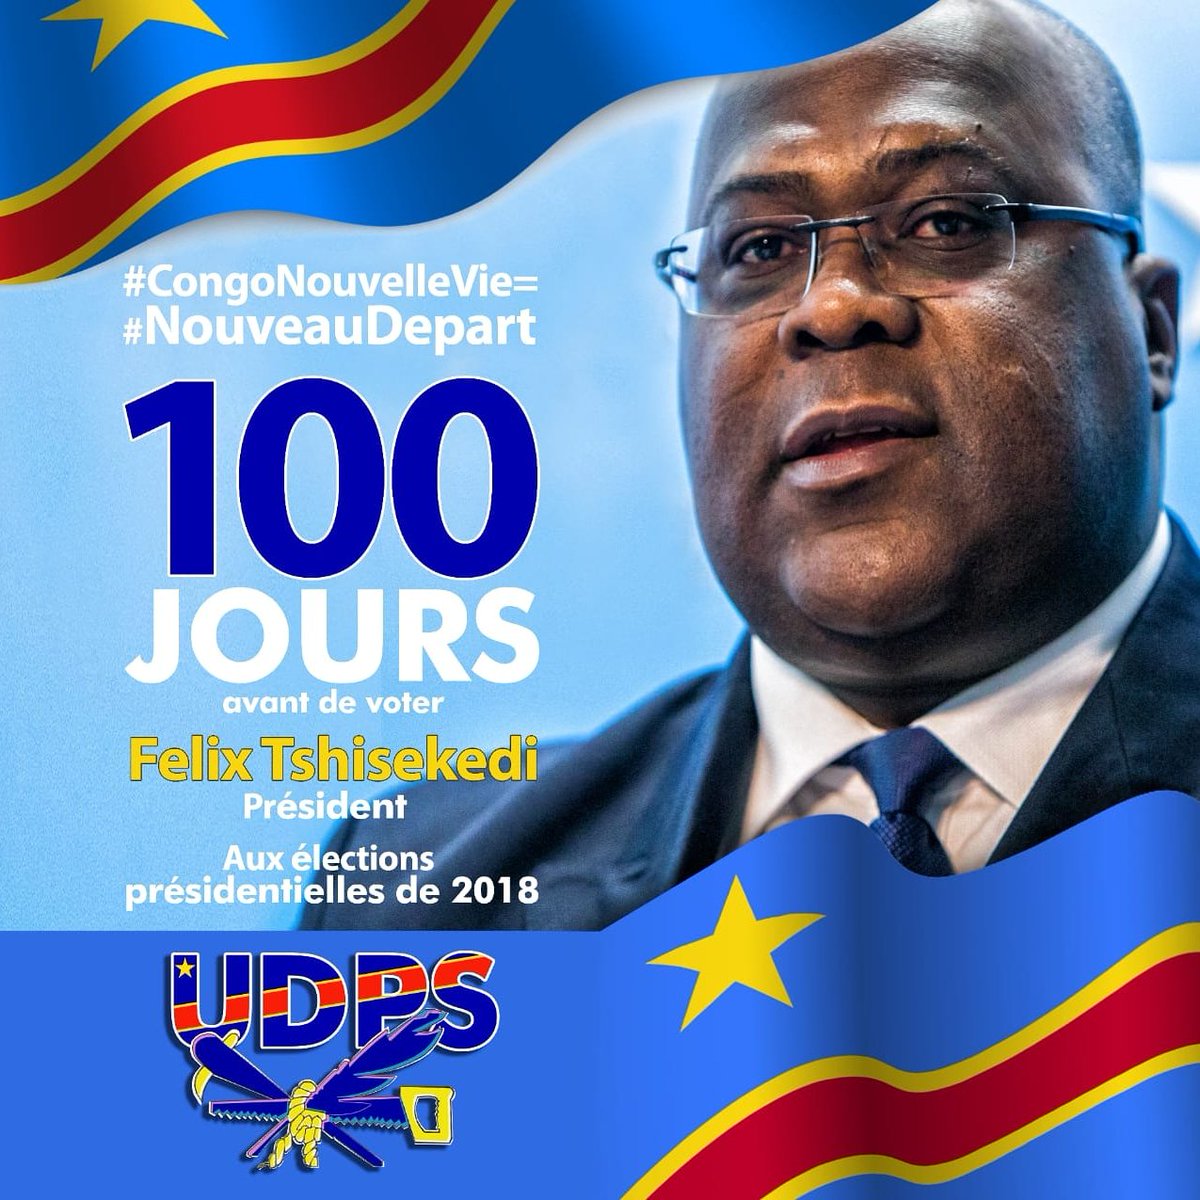 100 days to go until the DRC elections! Please share this message to call for a free, fair, democratic and safe election:
#CongoNouvelleVie
#nouveaudepart
#felixtshisekedi
#100jours
#rdc #drc #udps #congo #congolese #free #fair #election #election2018
#president #africa